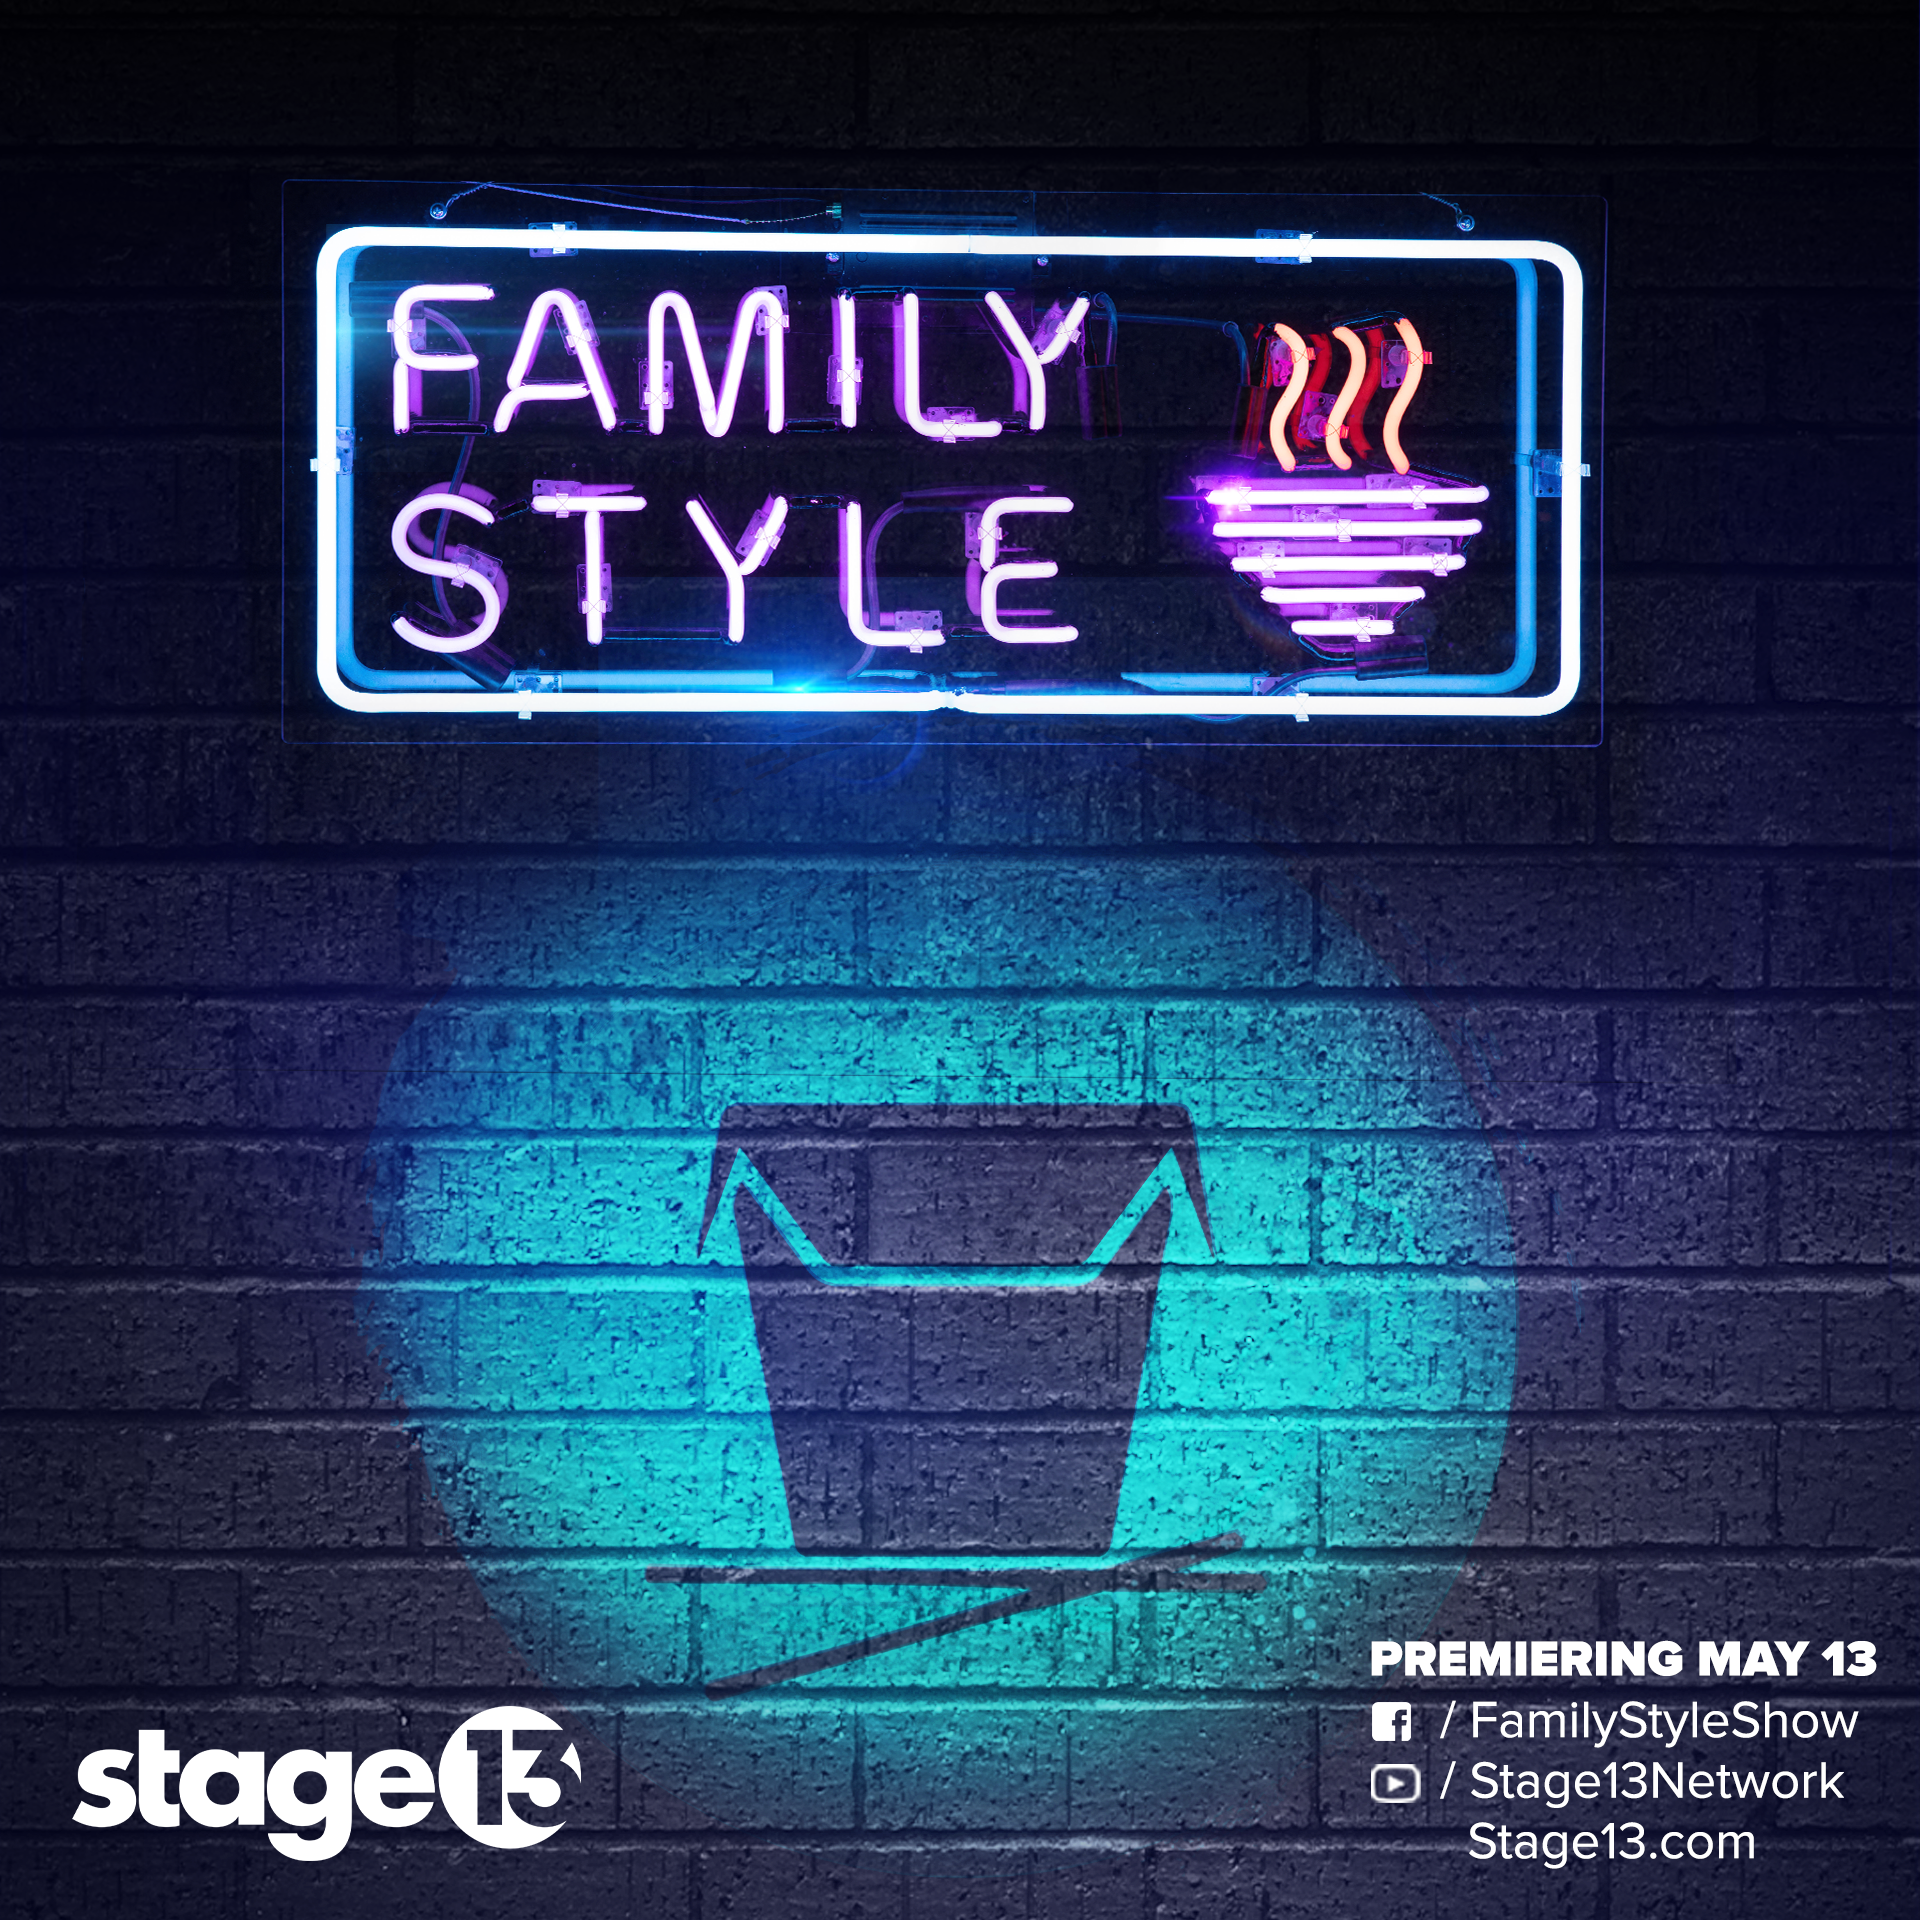 "Family Style" on Stage 13